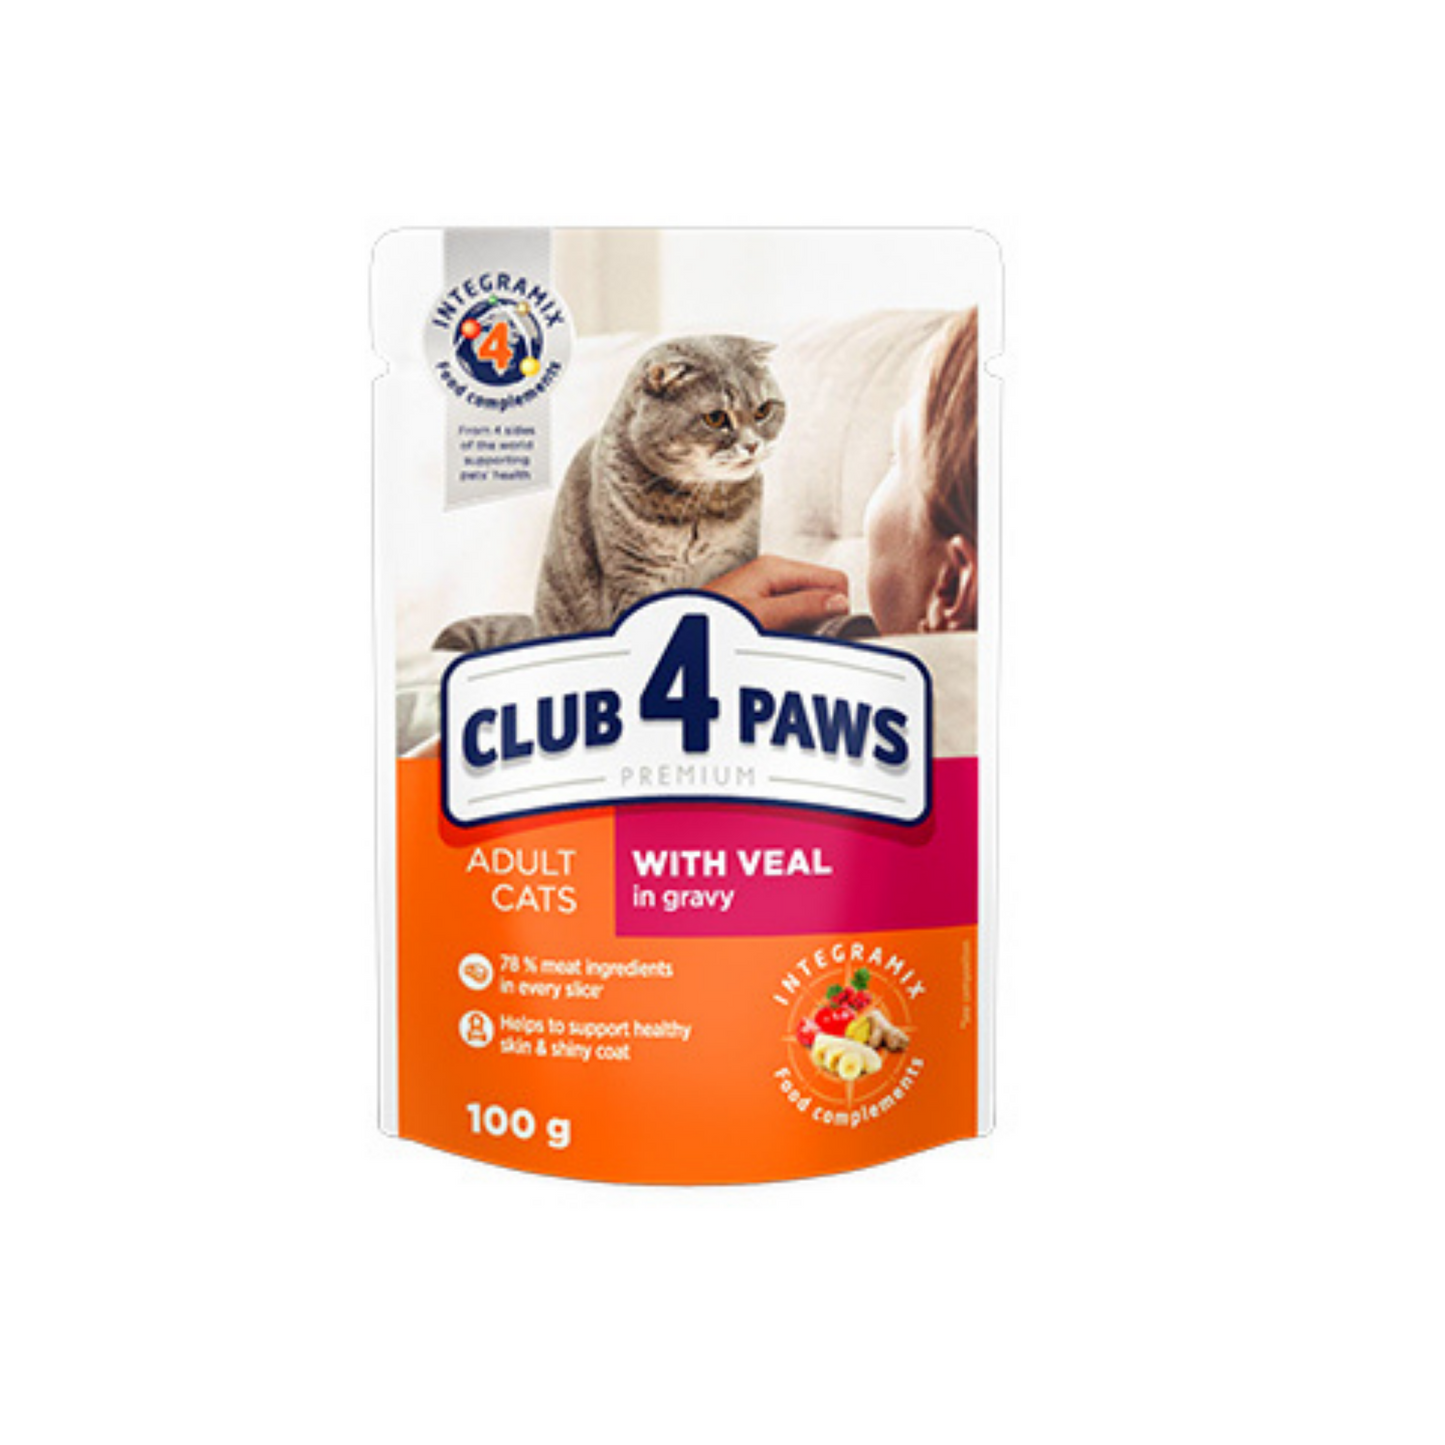 CLUB 4 PAWS Premium Pouches with Veal in Gravy